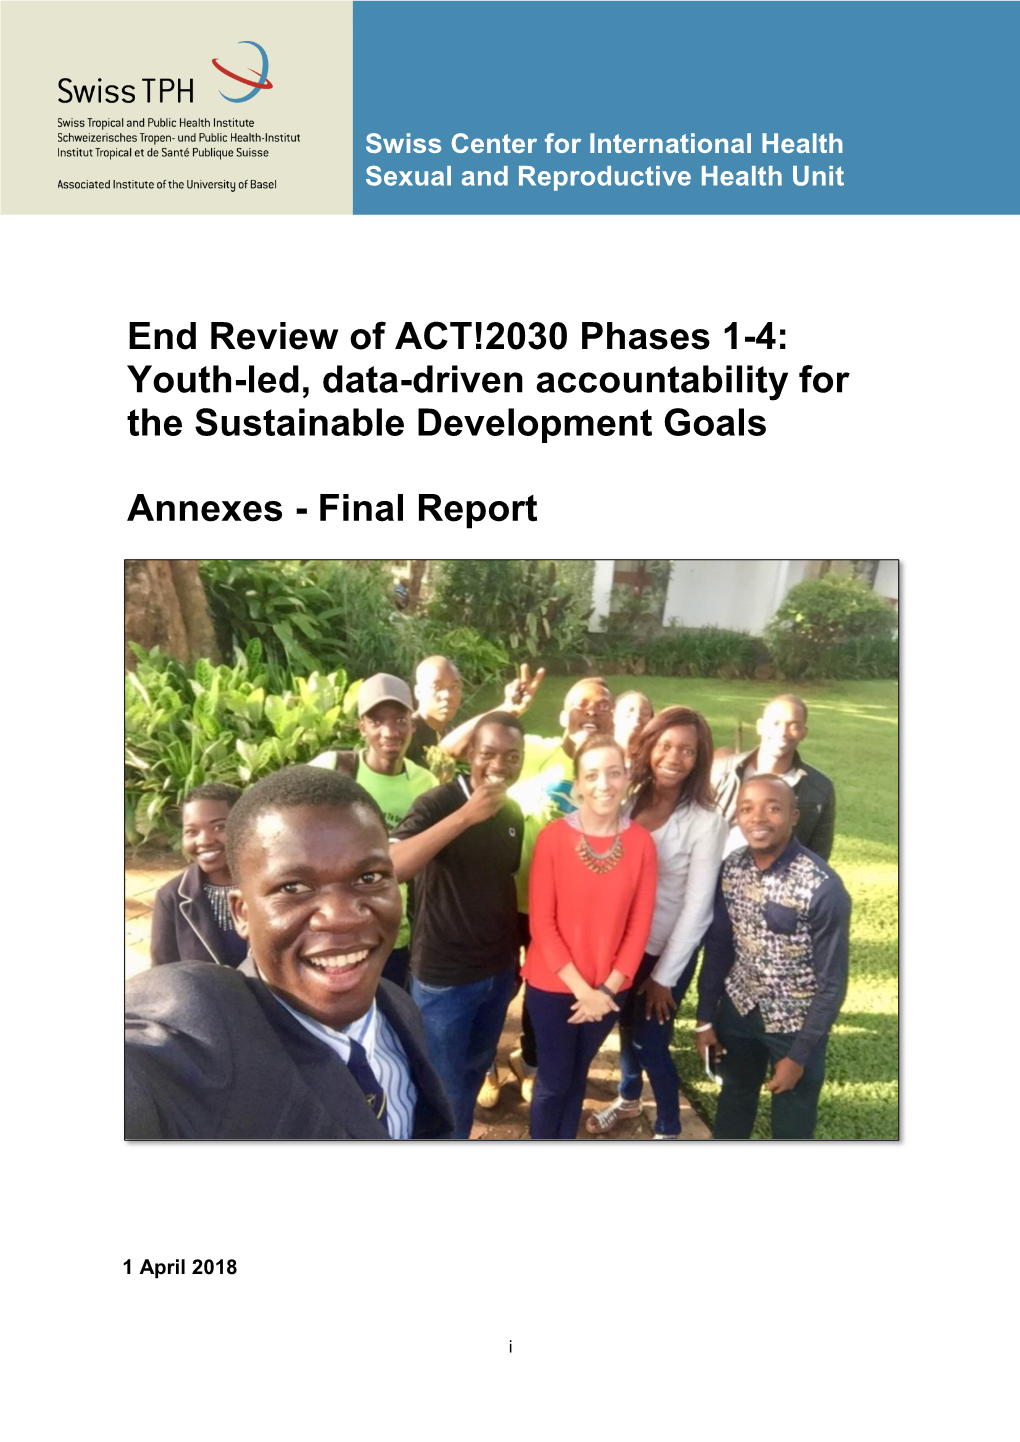 2030 Phases 1-4: Youth-Led, Data-Driven Accountability for the Sustainable Development Goals